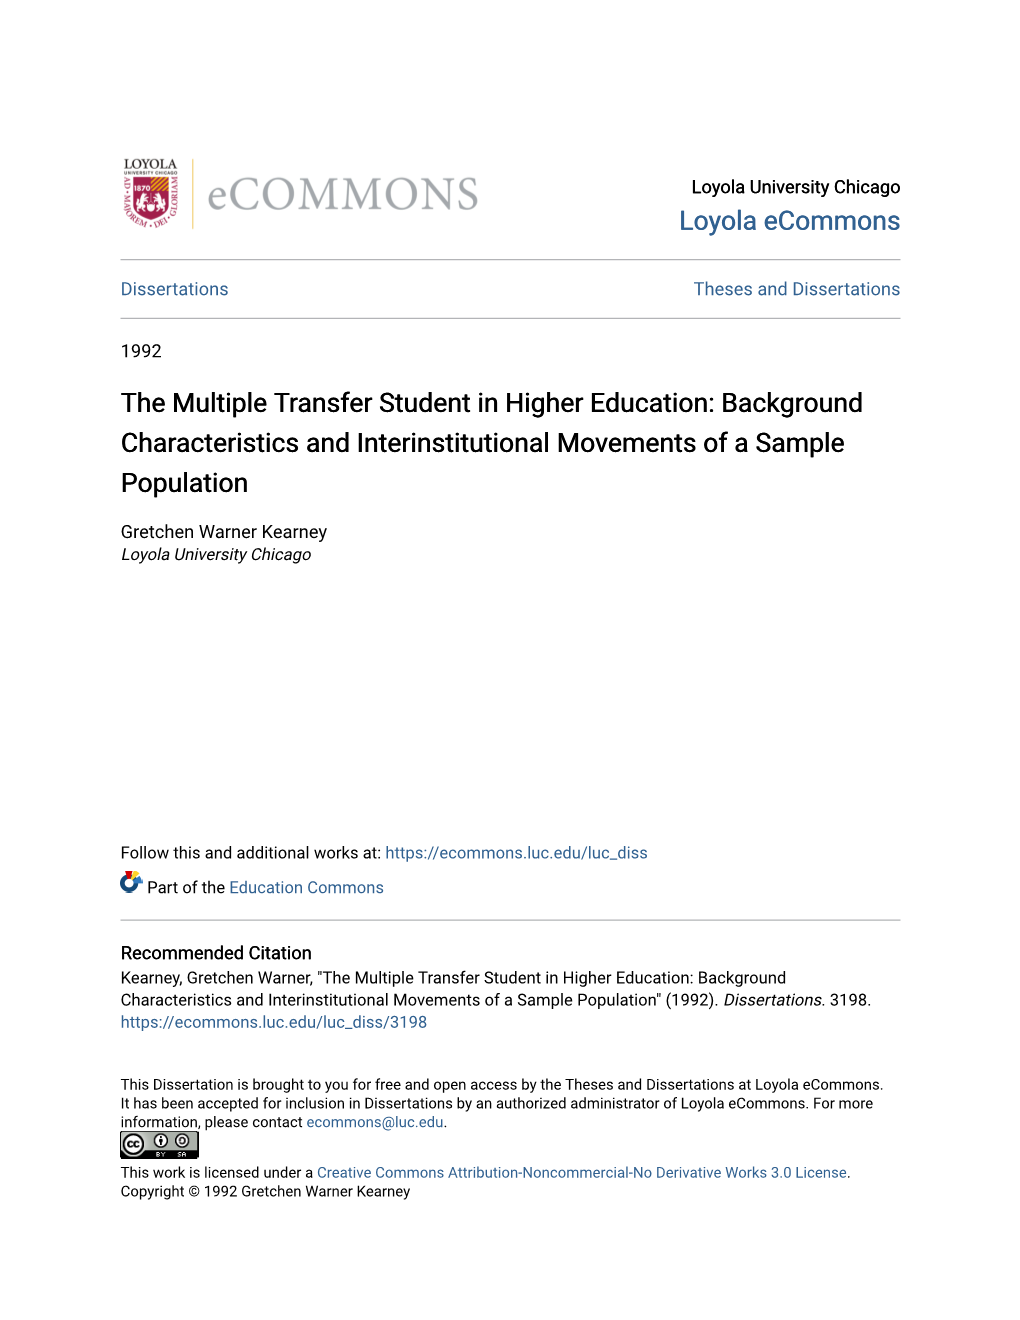 The Multiple Transfer Student in Higher Education: Background Characteristics and Interinstitutional Movements of a Sample Population